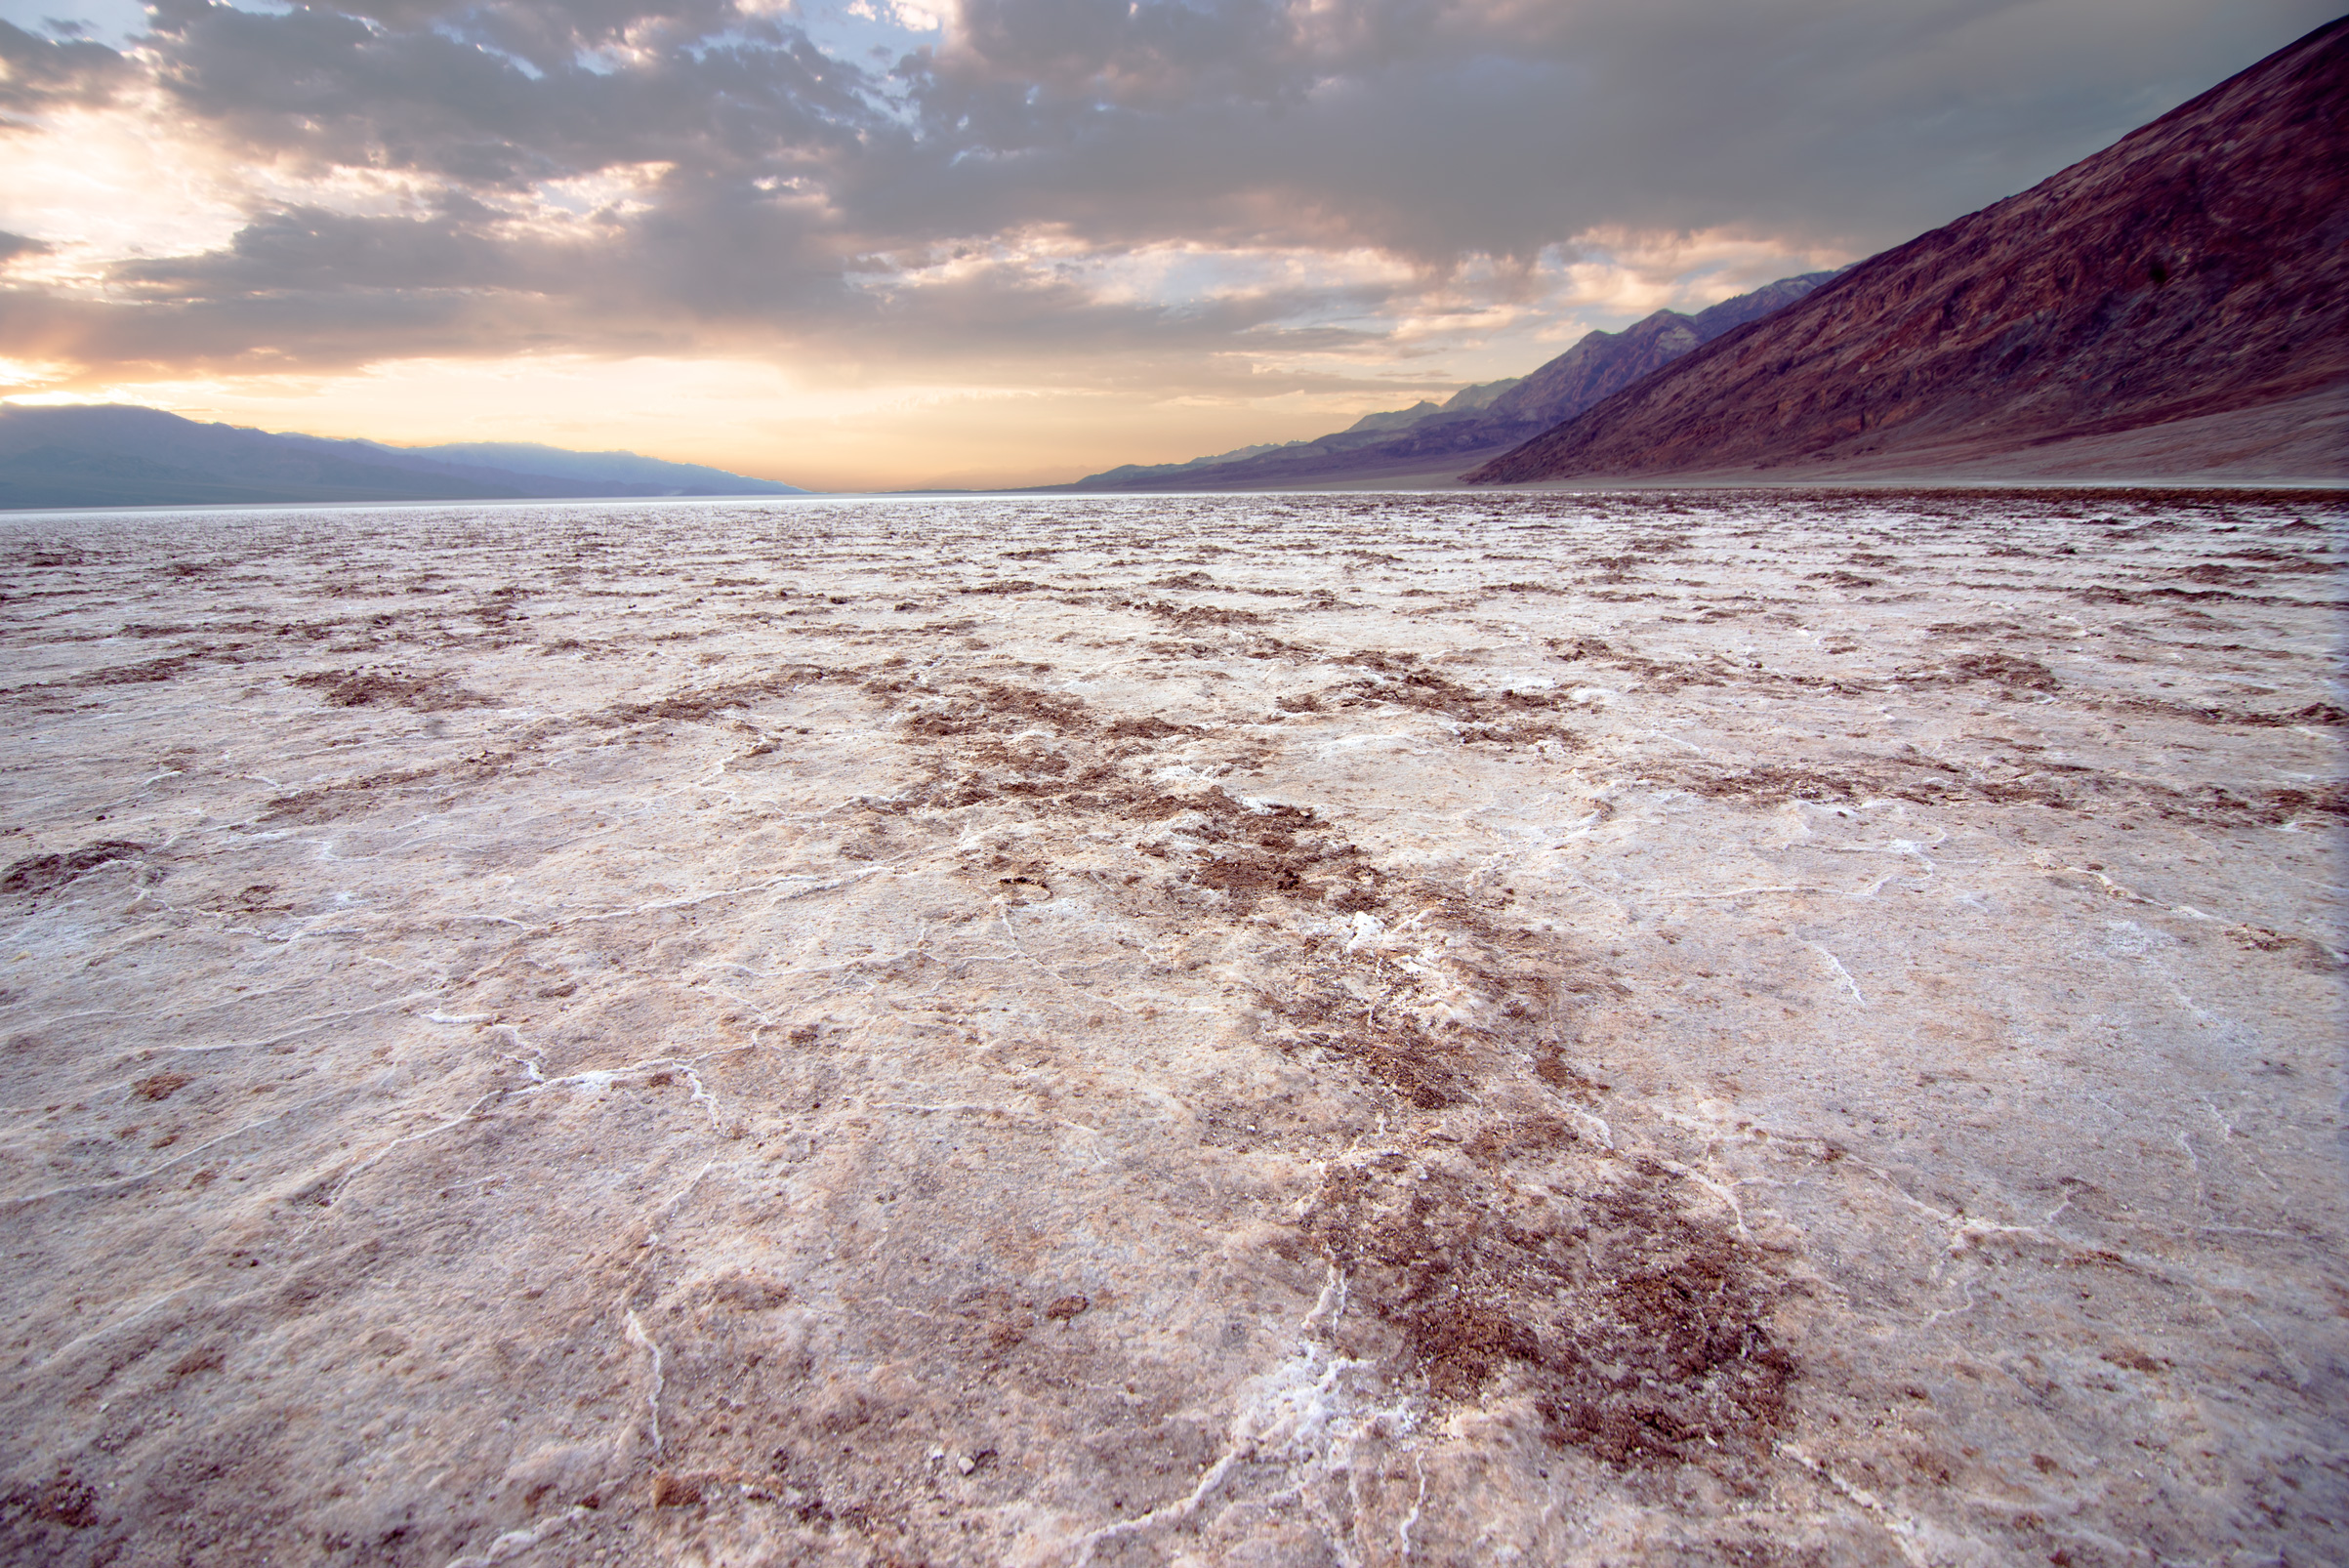 20170624_30_Trip_Death_Valley_Driving_Video_Badwater_Basin_048.jpg